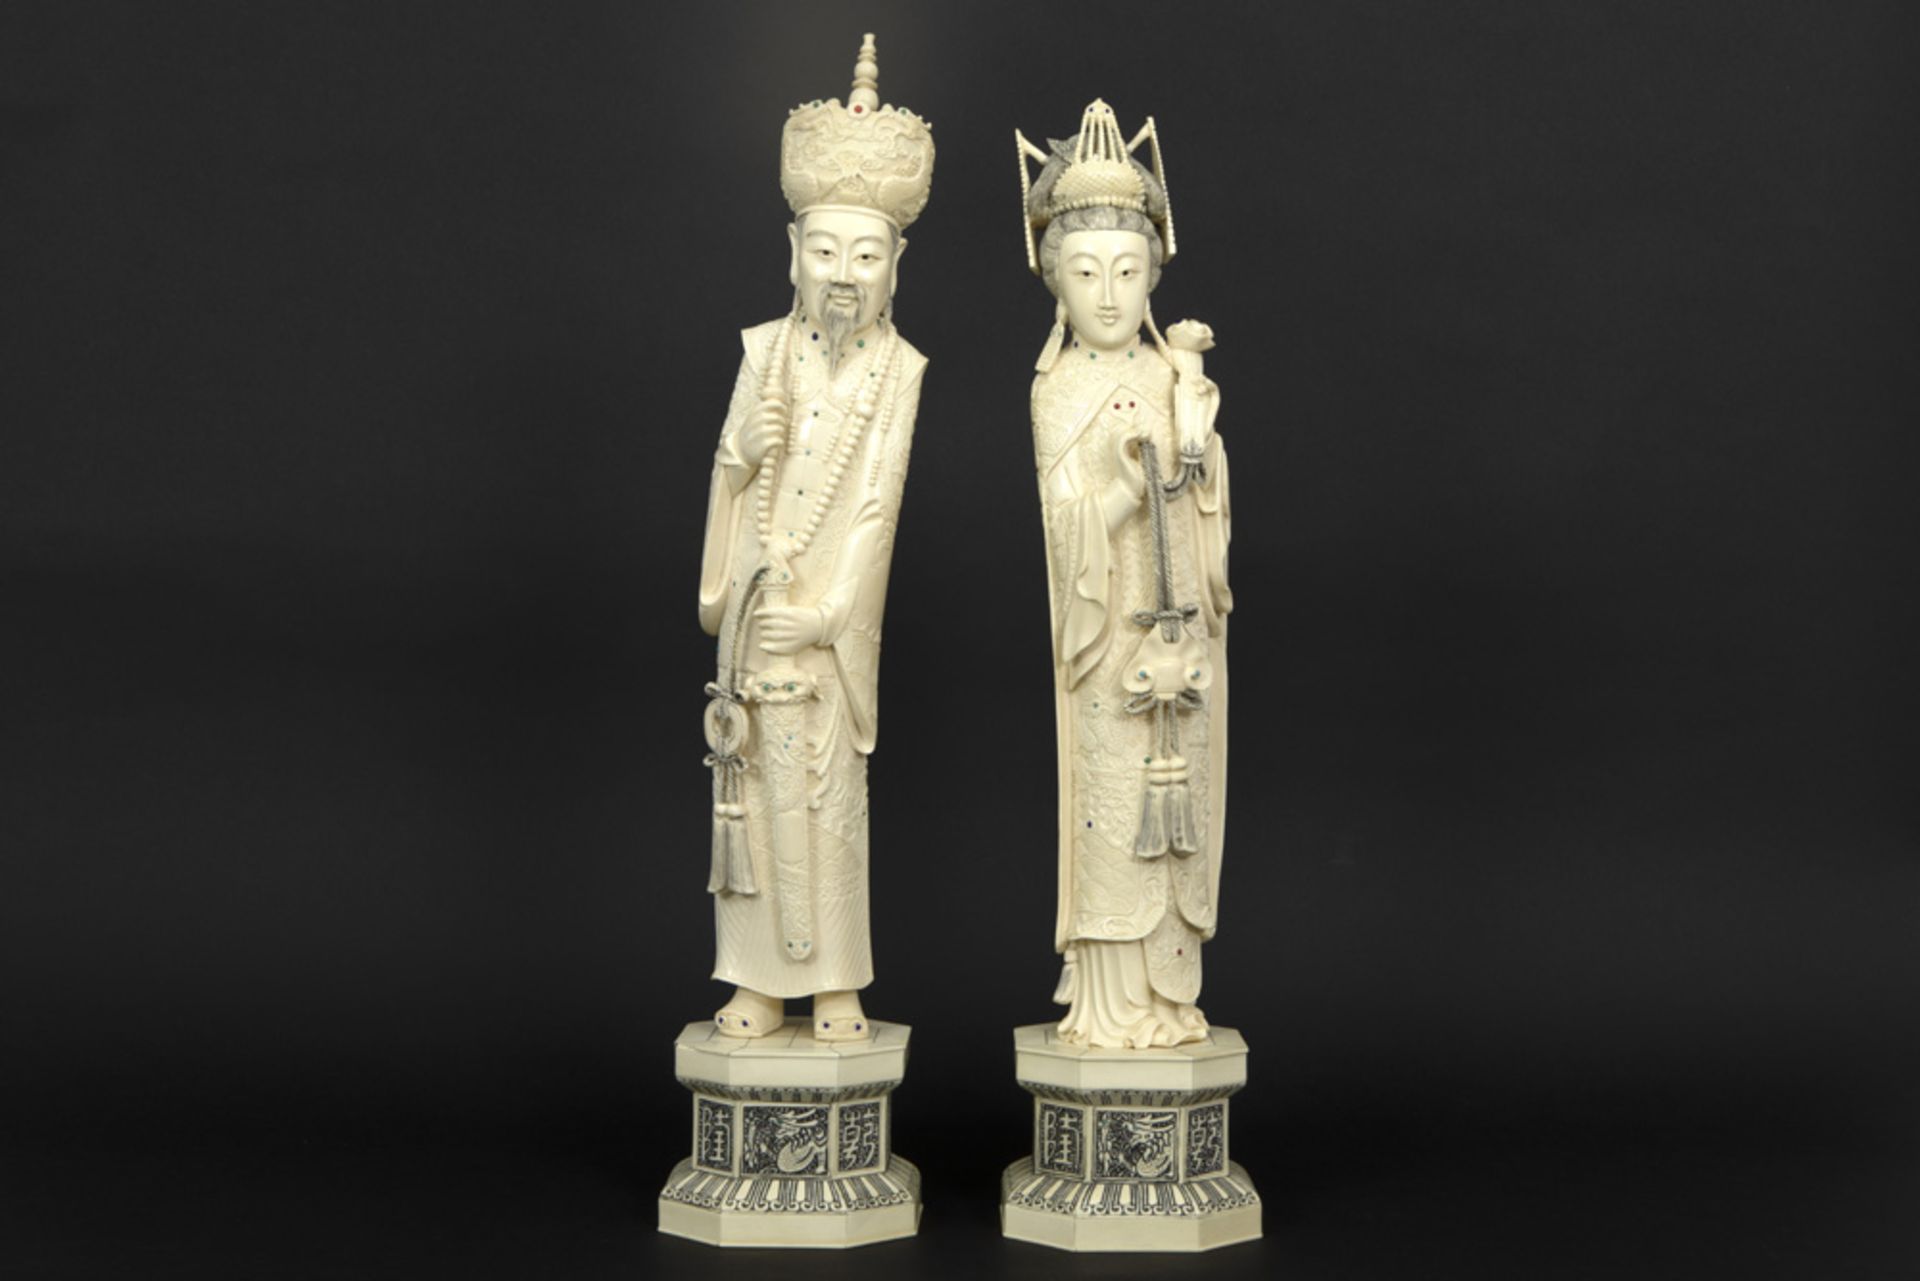 pair of old Chinese "King and Queen" sculptures in ivory with inlaid beads in coral and lapis lazuli